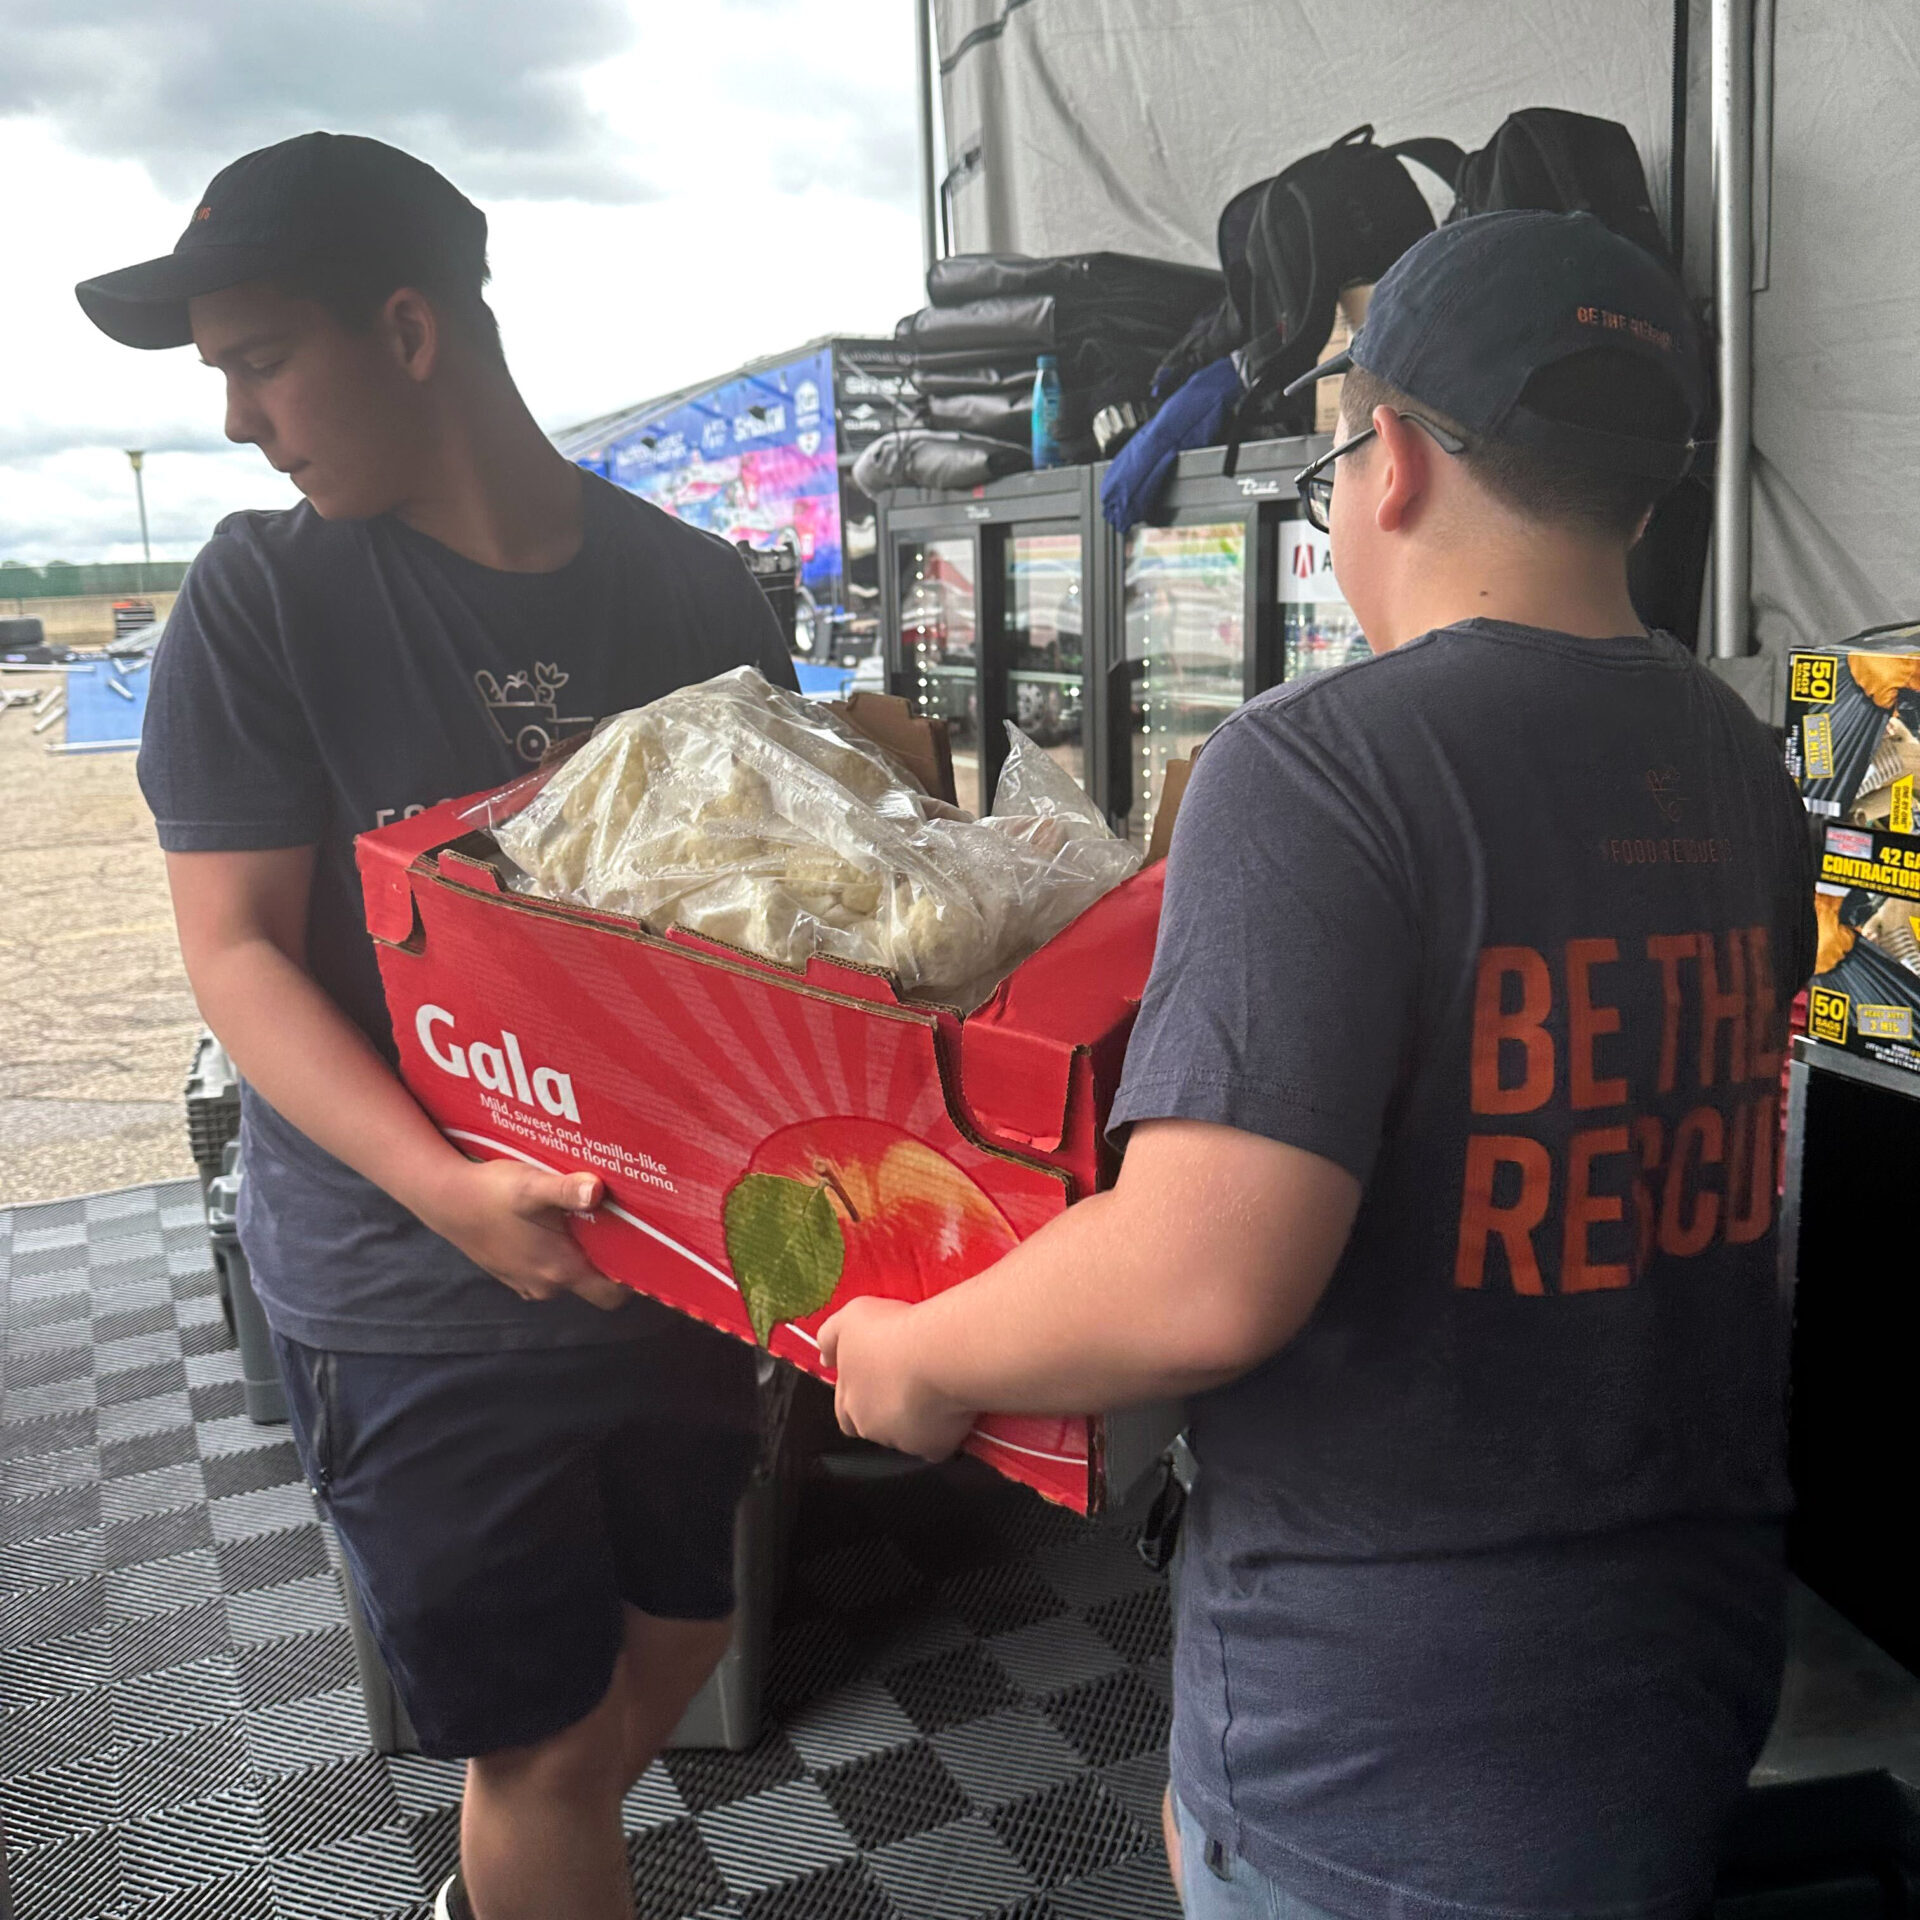 Two volunteers carry a large box of food donations from the Detroit Grand Prix